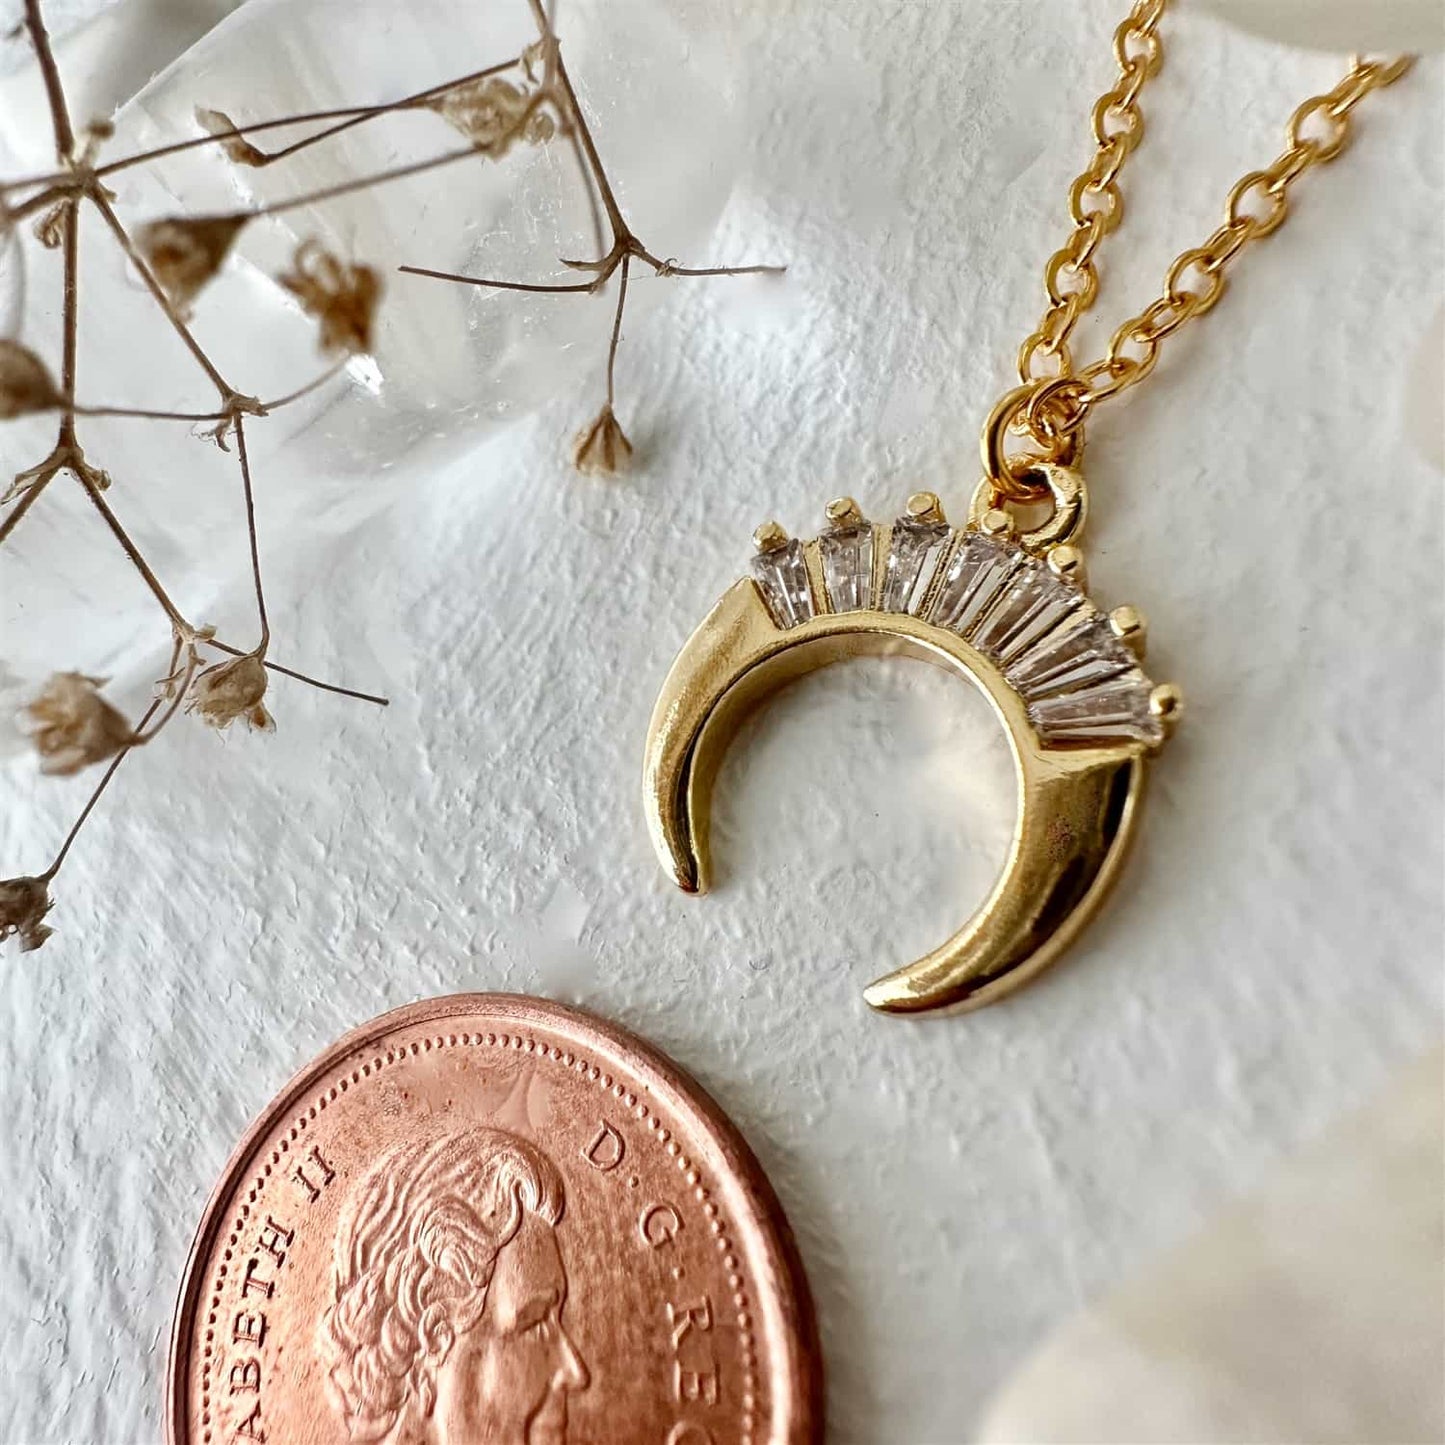 Khonsu Crescent Moon Charm Necklace in Gold